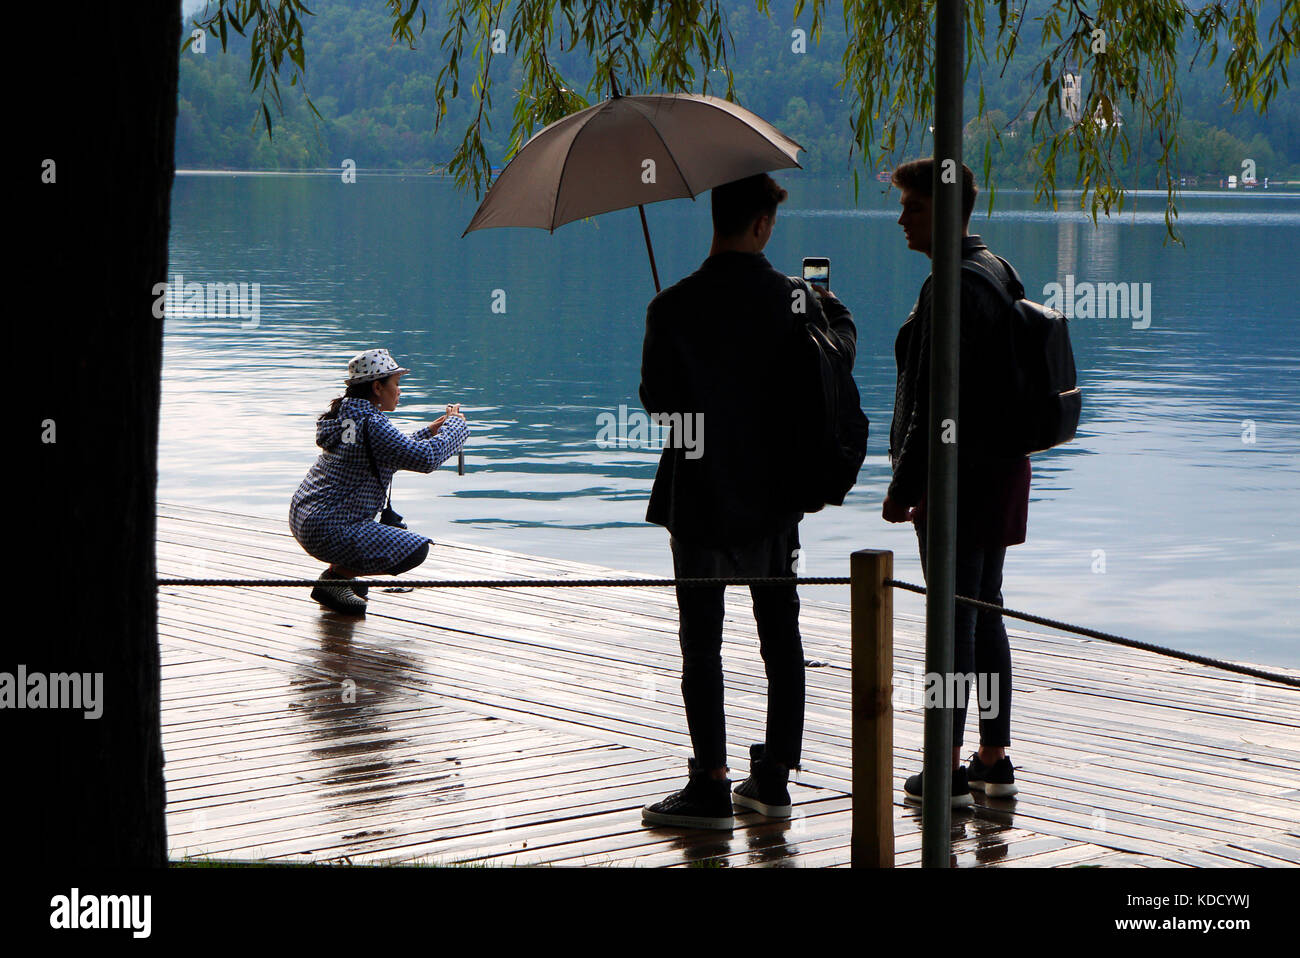 Tourists taking photographs beside Lake Bled in Bled, Slovenia. Stock Photo